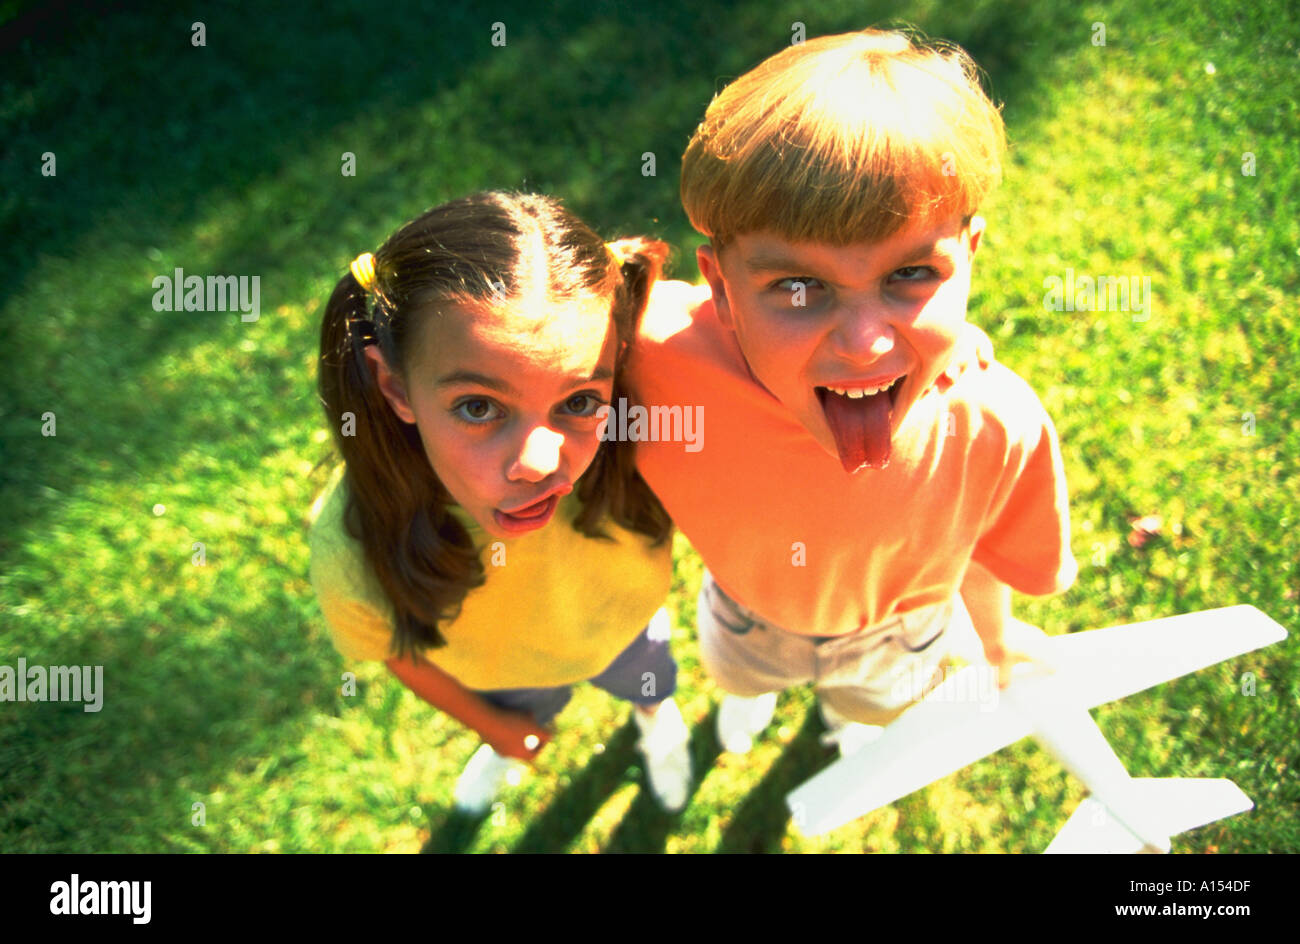 Aerial view of a young boy and girl making faces at the camera while holding a model airplane Stock Photo